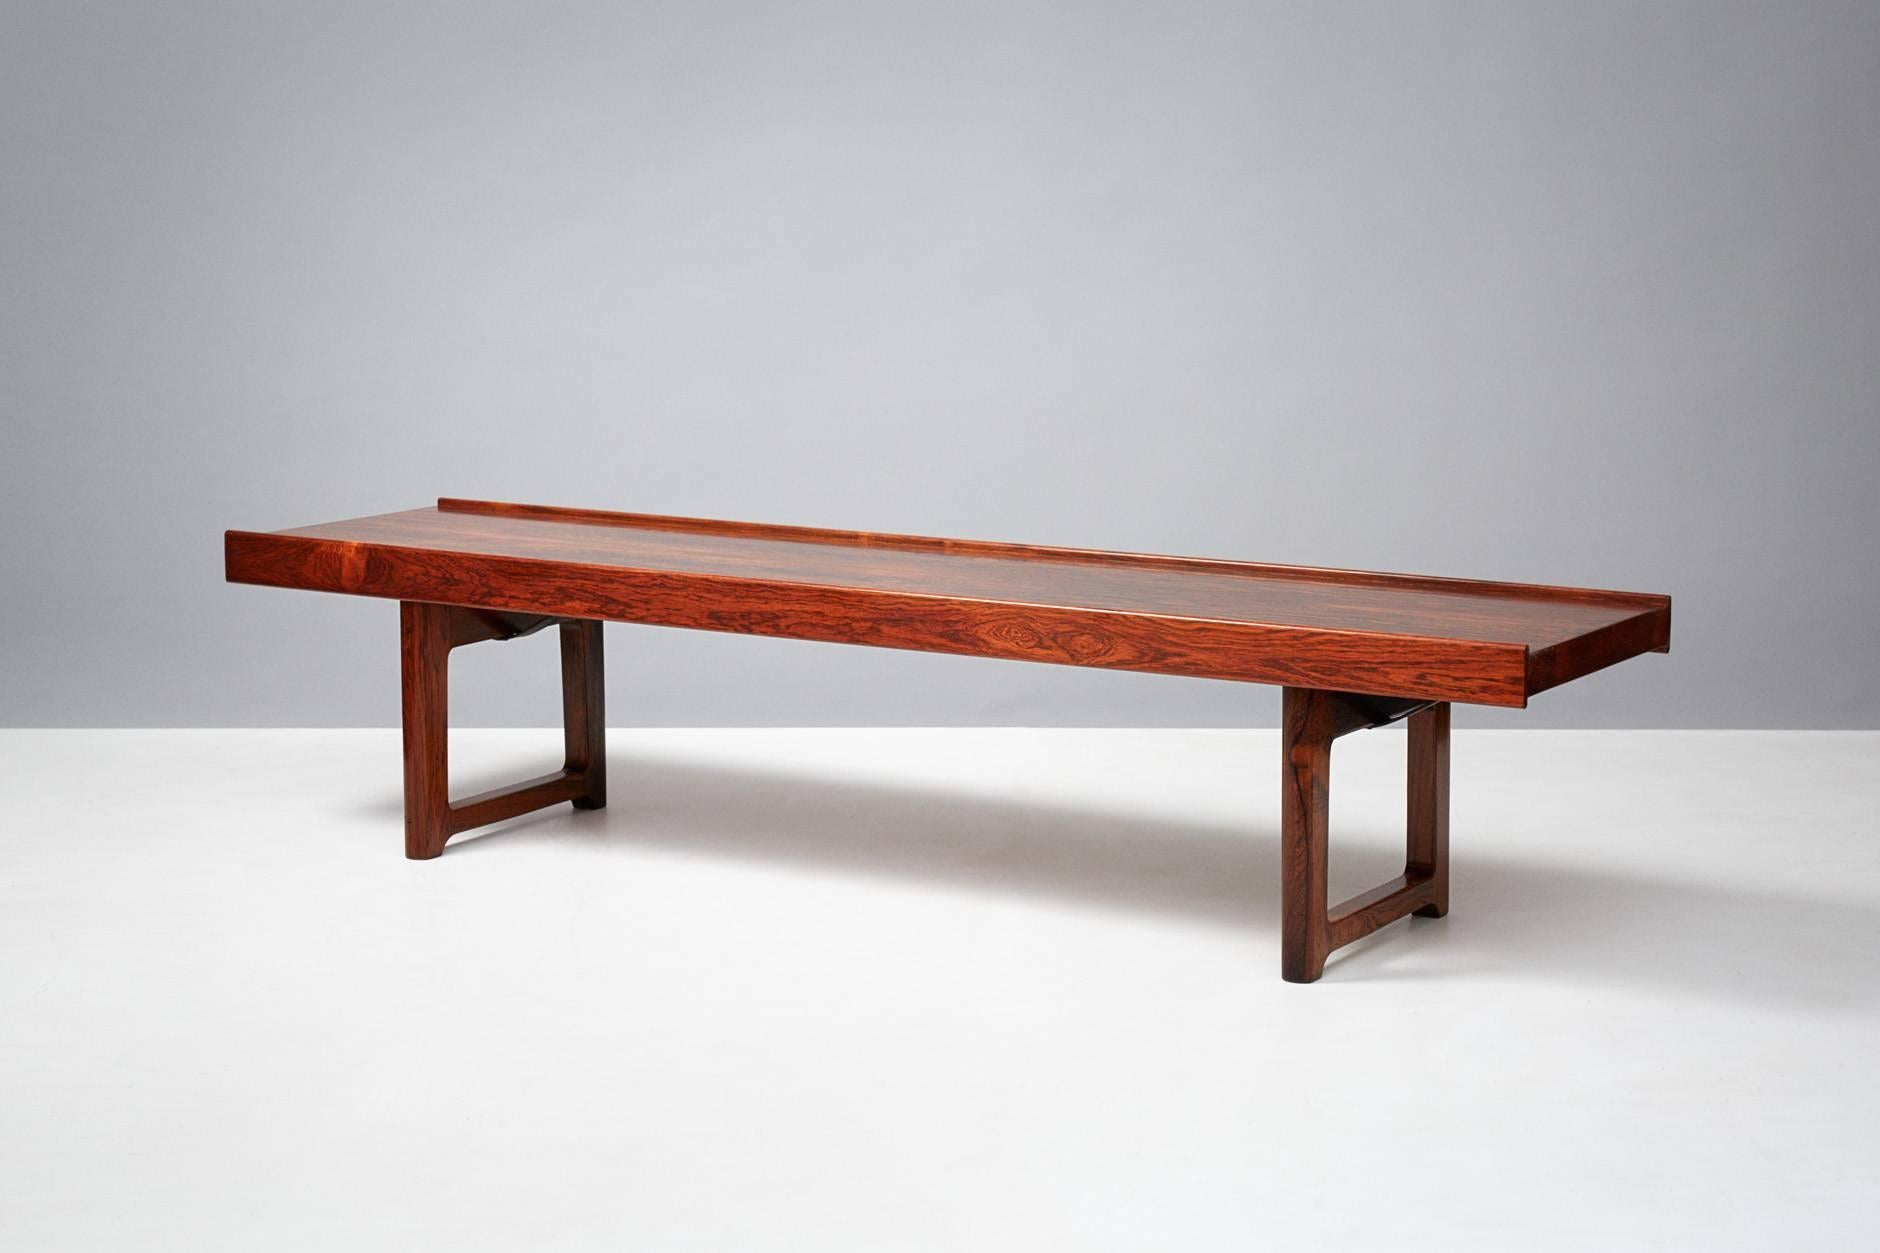 Torbjorn Afdal

Rosewood Krobo bench, circa 1960

Multipurpose bench from Norwegian designer Torbjorn Afdal for Bruksbo. Can be used as a bench or low coffee table.